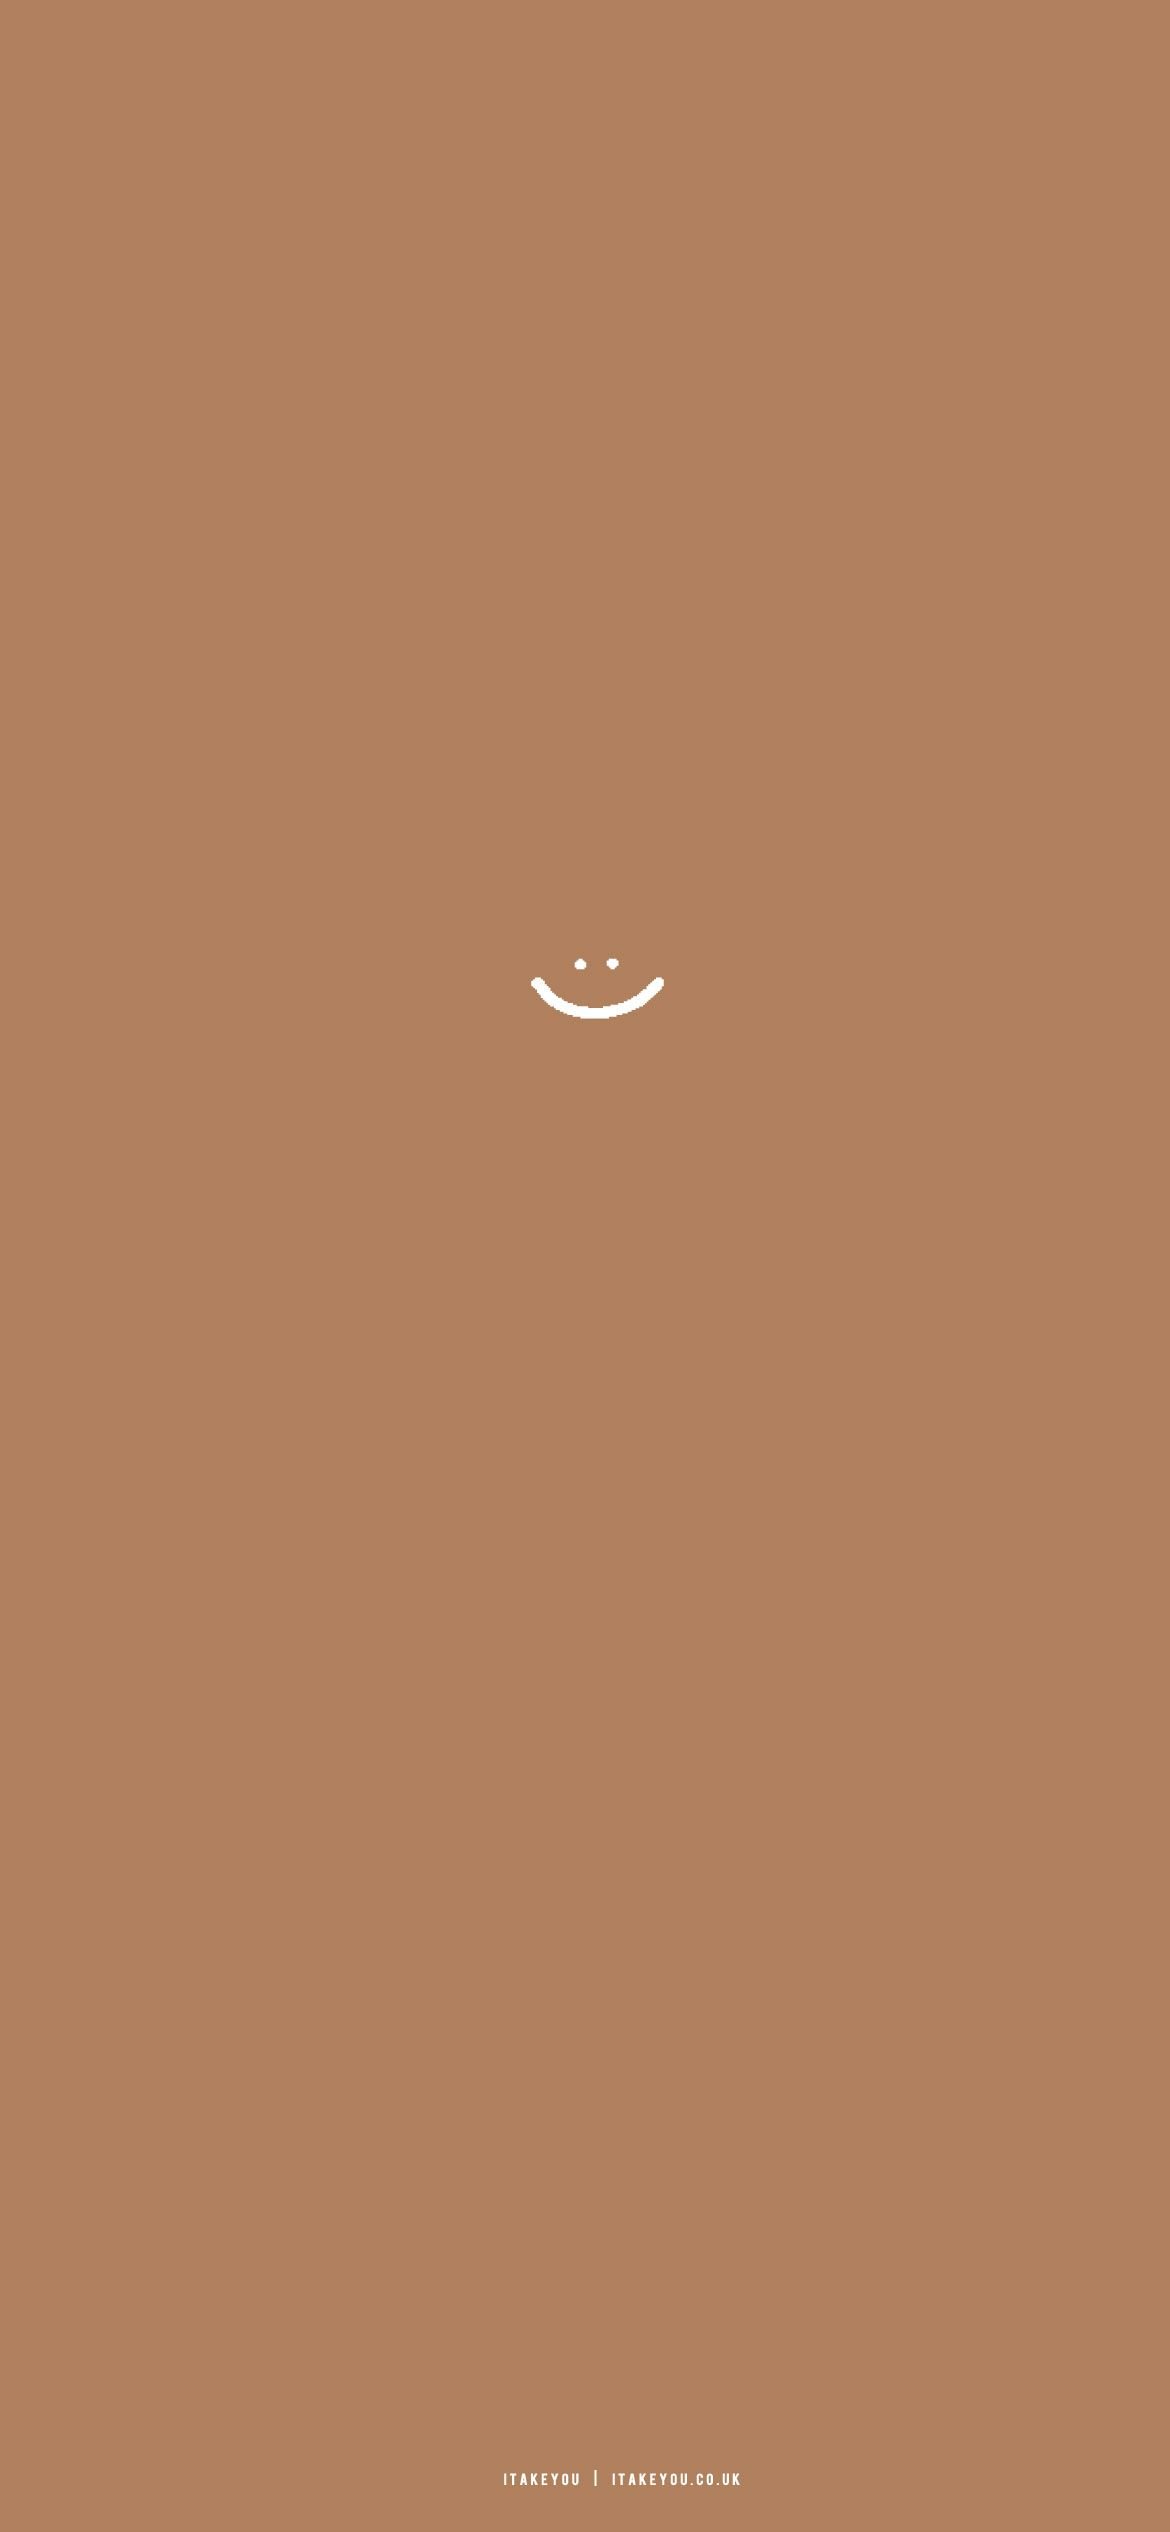 Minimalist Brown Wallpaper iPhone Ideas for iPhone, Smile. Brown wallpaper, Color wallpaper iphone, Simple iphone wallpaper